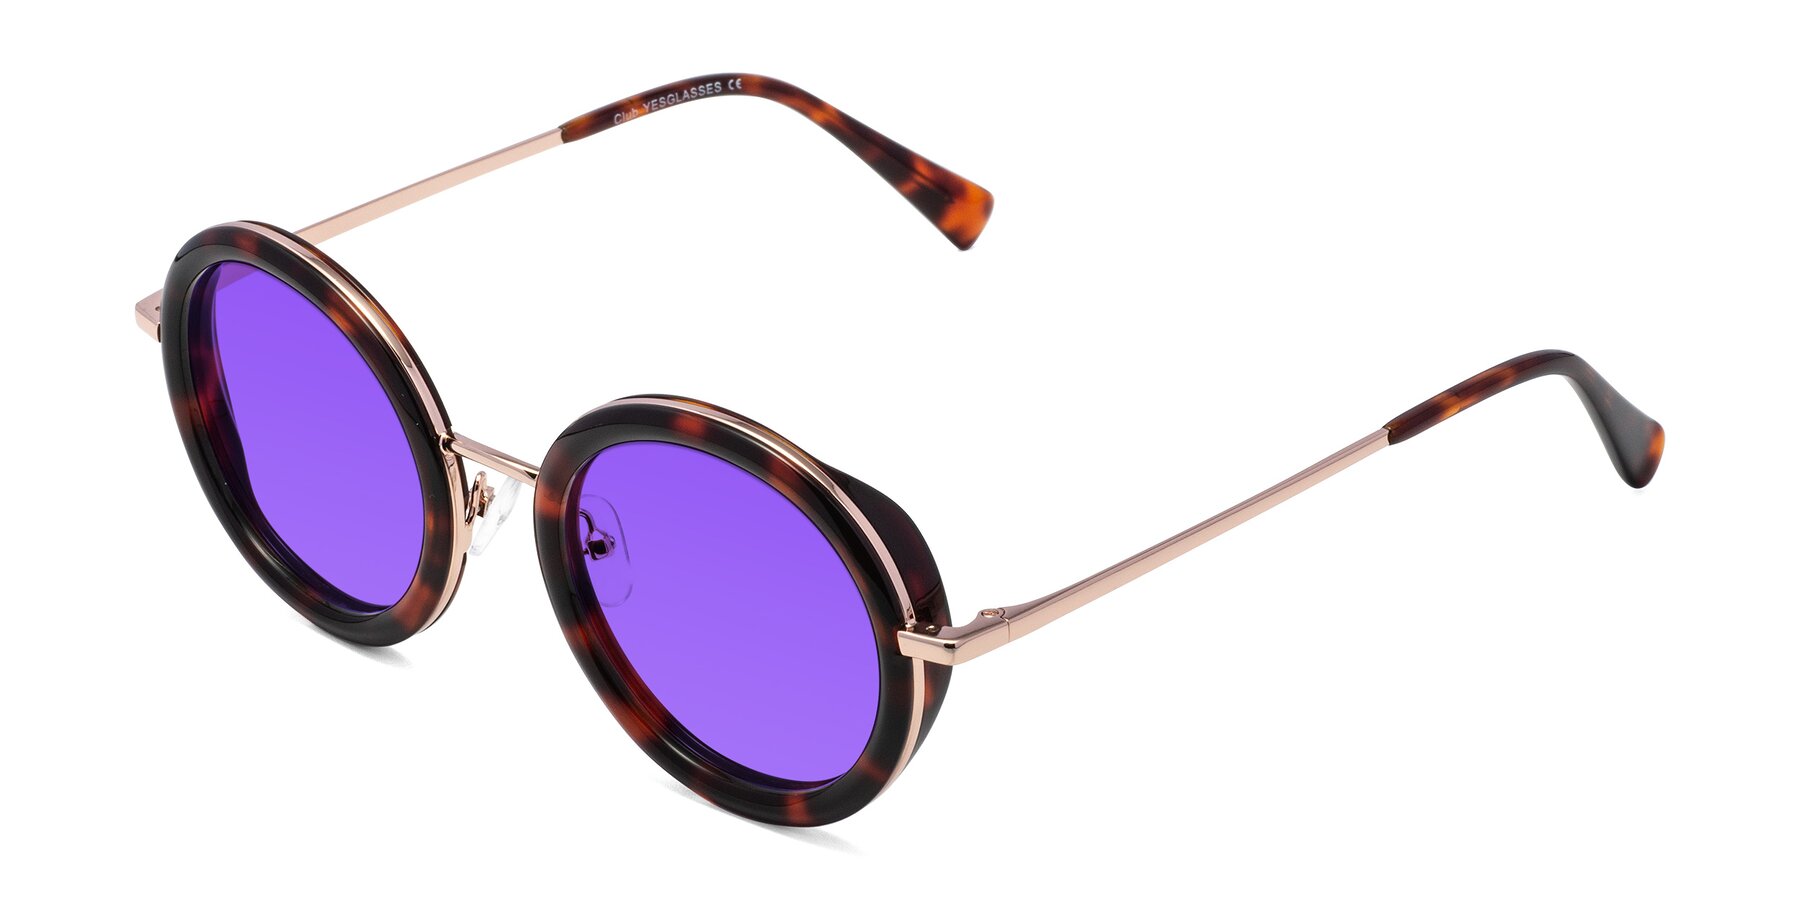 Angle of Club in Tortoise-Rose Gold with Purple Tinted Lenses